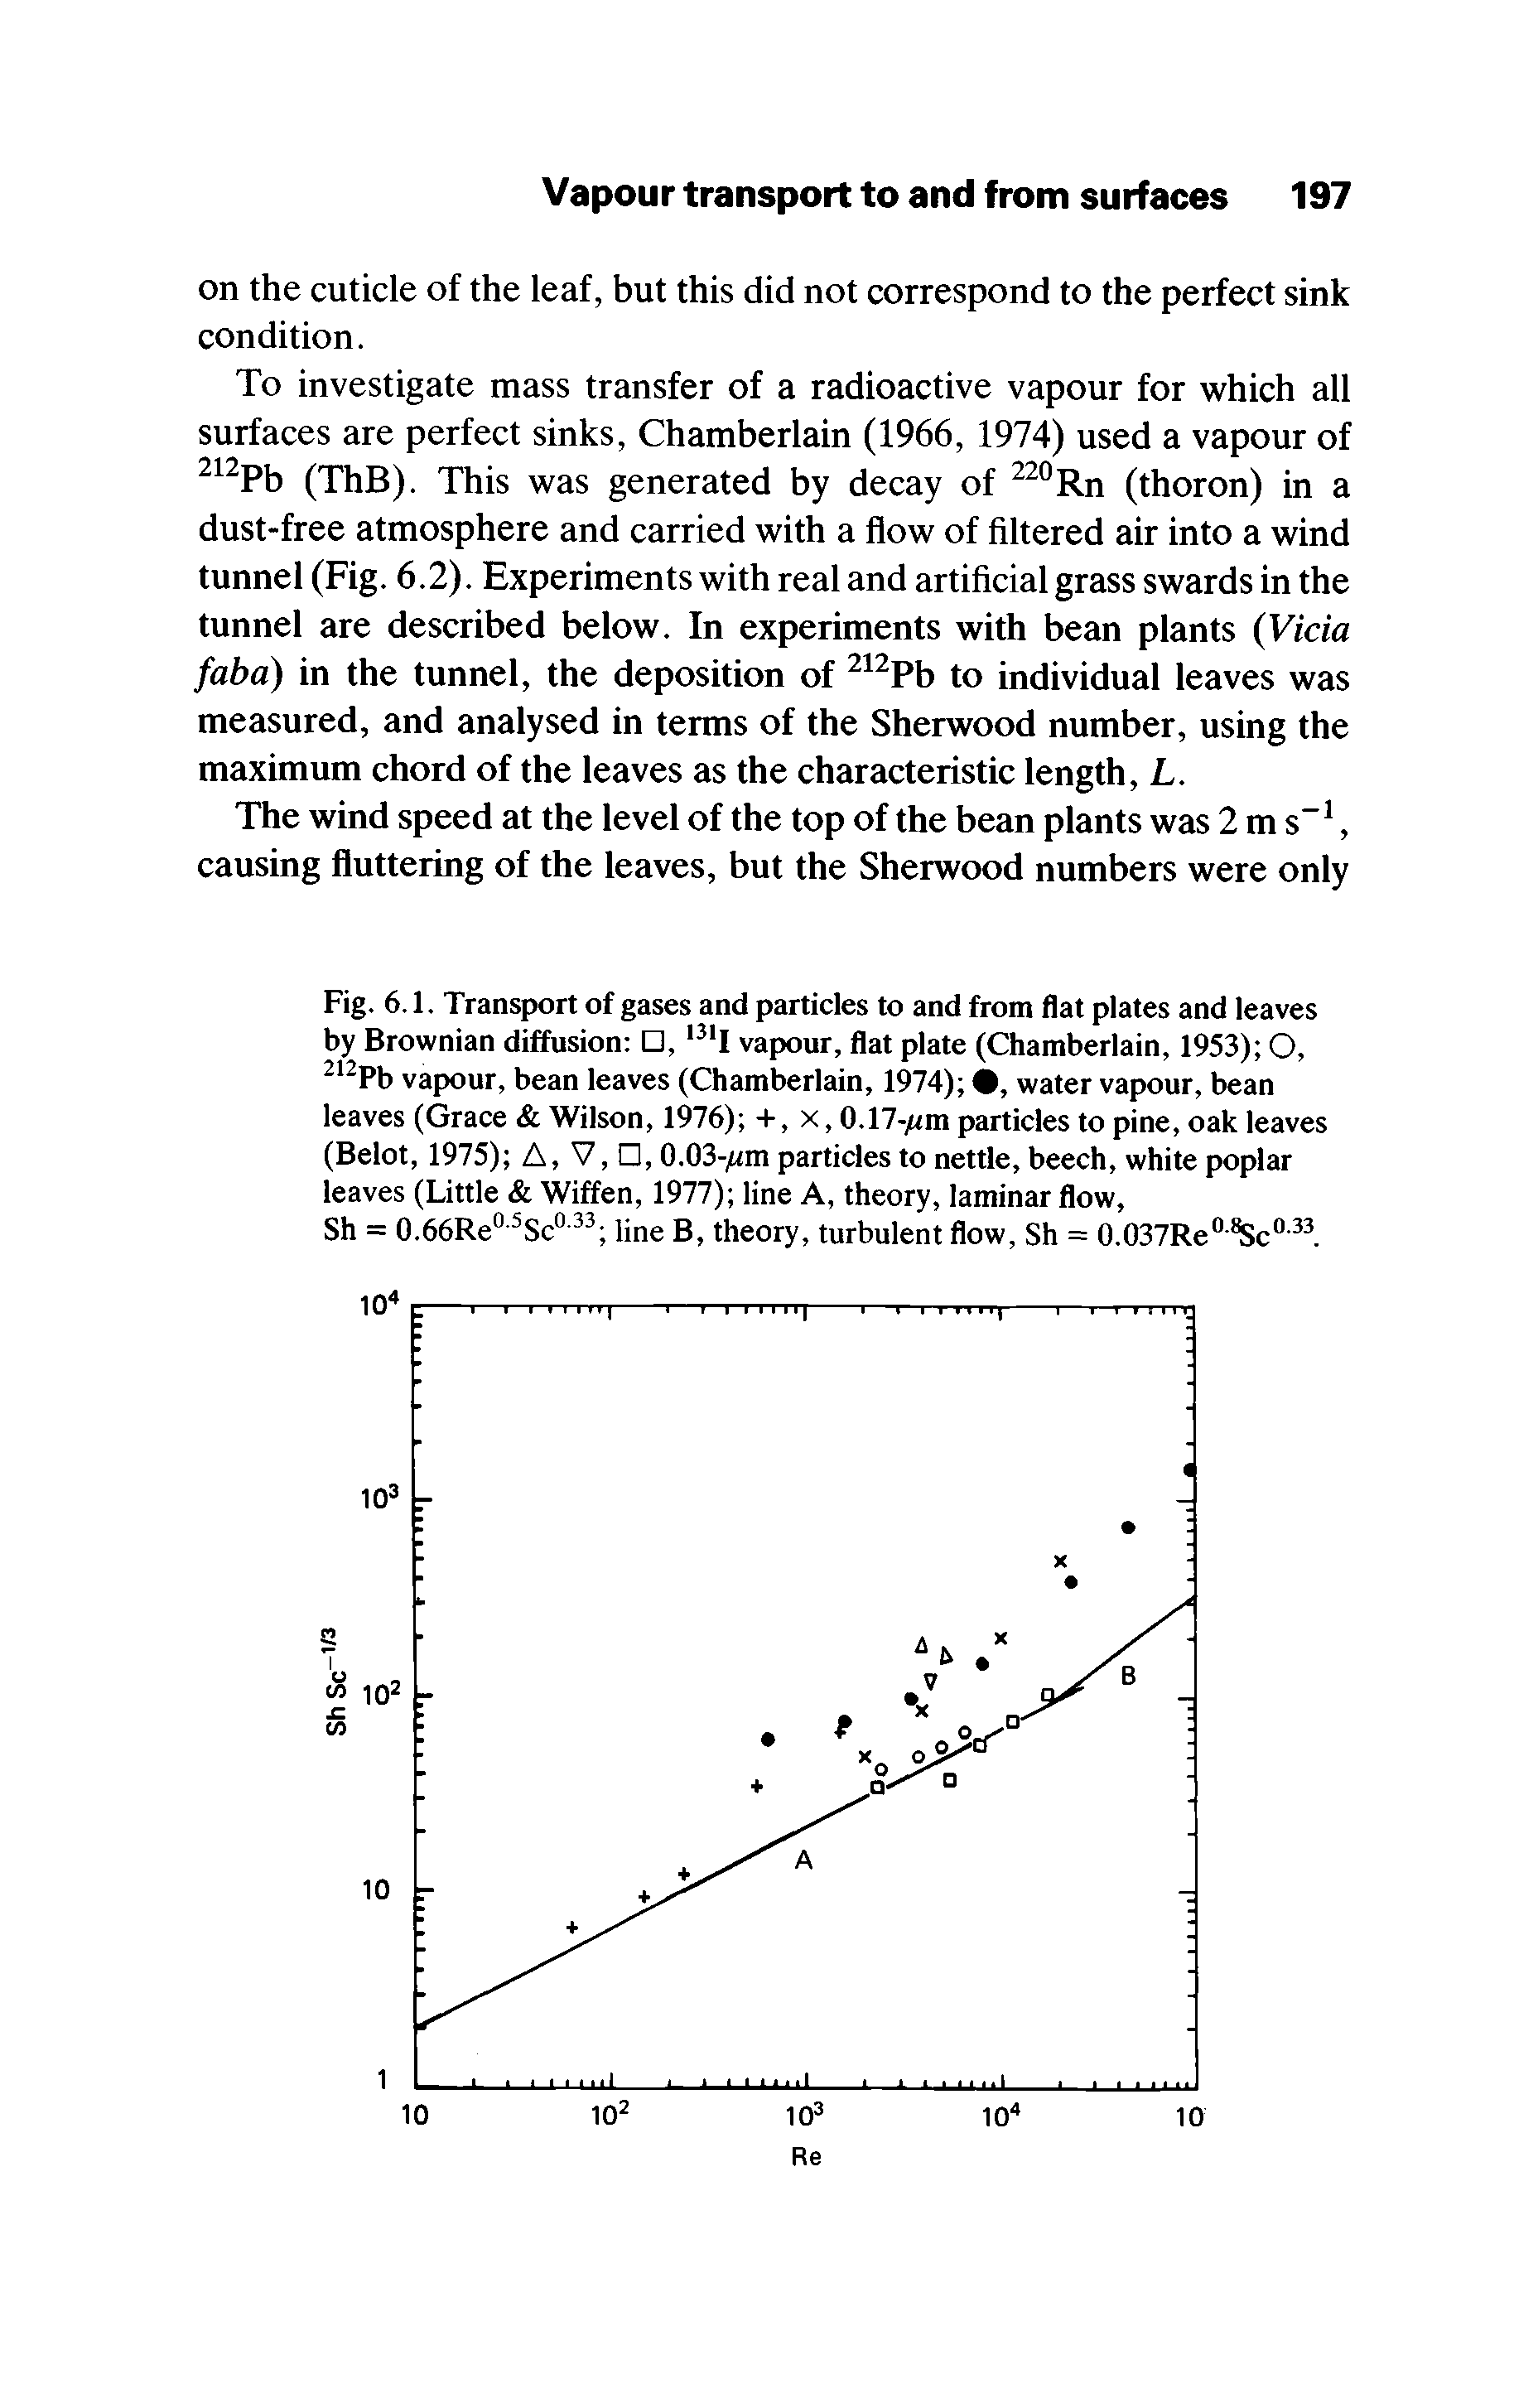 Fig. 6.1. Transport of gases and particles to and from flat plates and leaves by Brownian diffusion , l3lI vapour, flat plate (Chamberlain, 1953) O, 212Pb vapour, bean leaves (Chamberlain, 1974) , water vapour, bean leaves (Grace Wilson, 1976) +, x, 0.17-jum particles to pine, oak leaves (Belot, 1975) A, V, , 0.03- m particles to nettle, beech, white poplar leaves (Little Wiffen, 1977) line A, theory, laminar flow,...